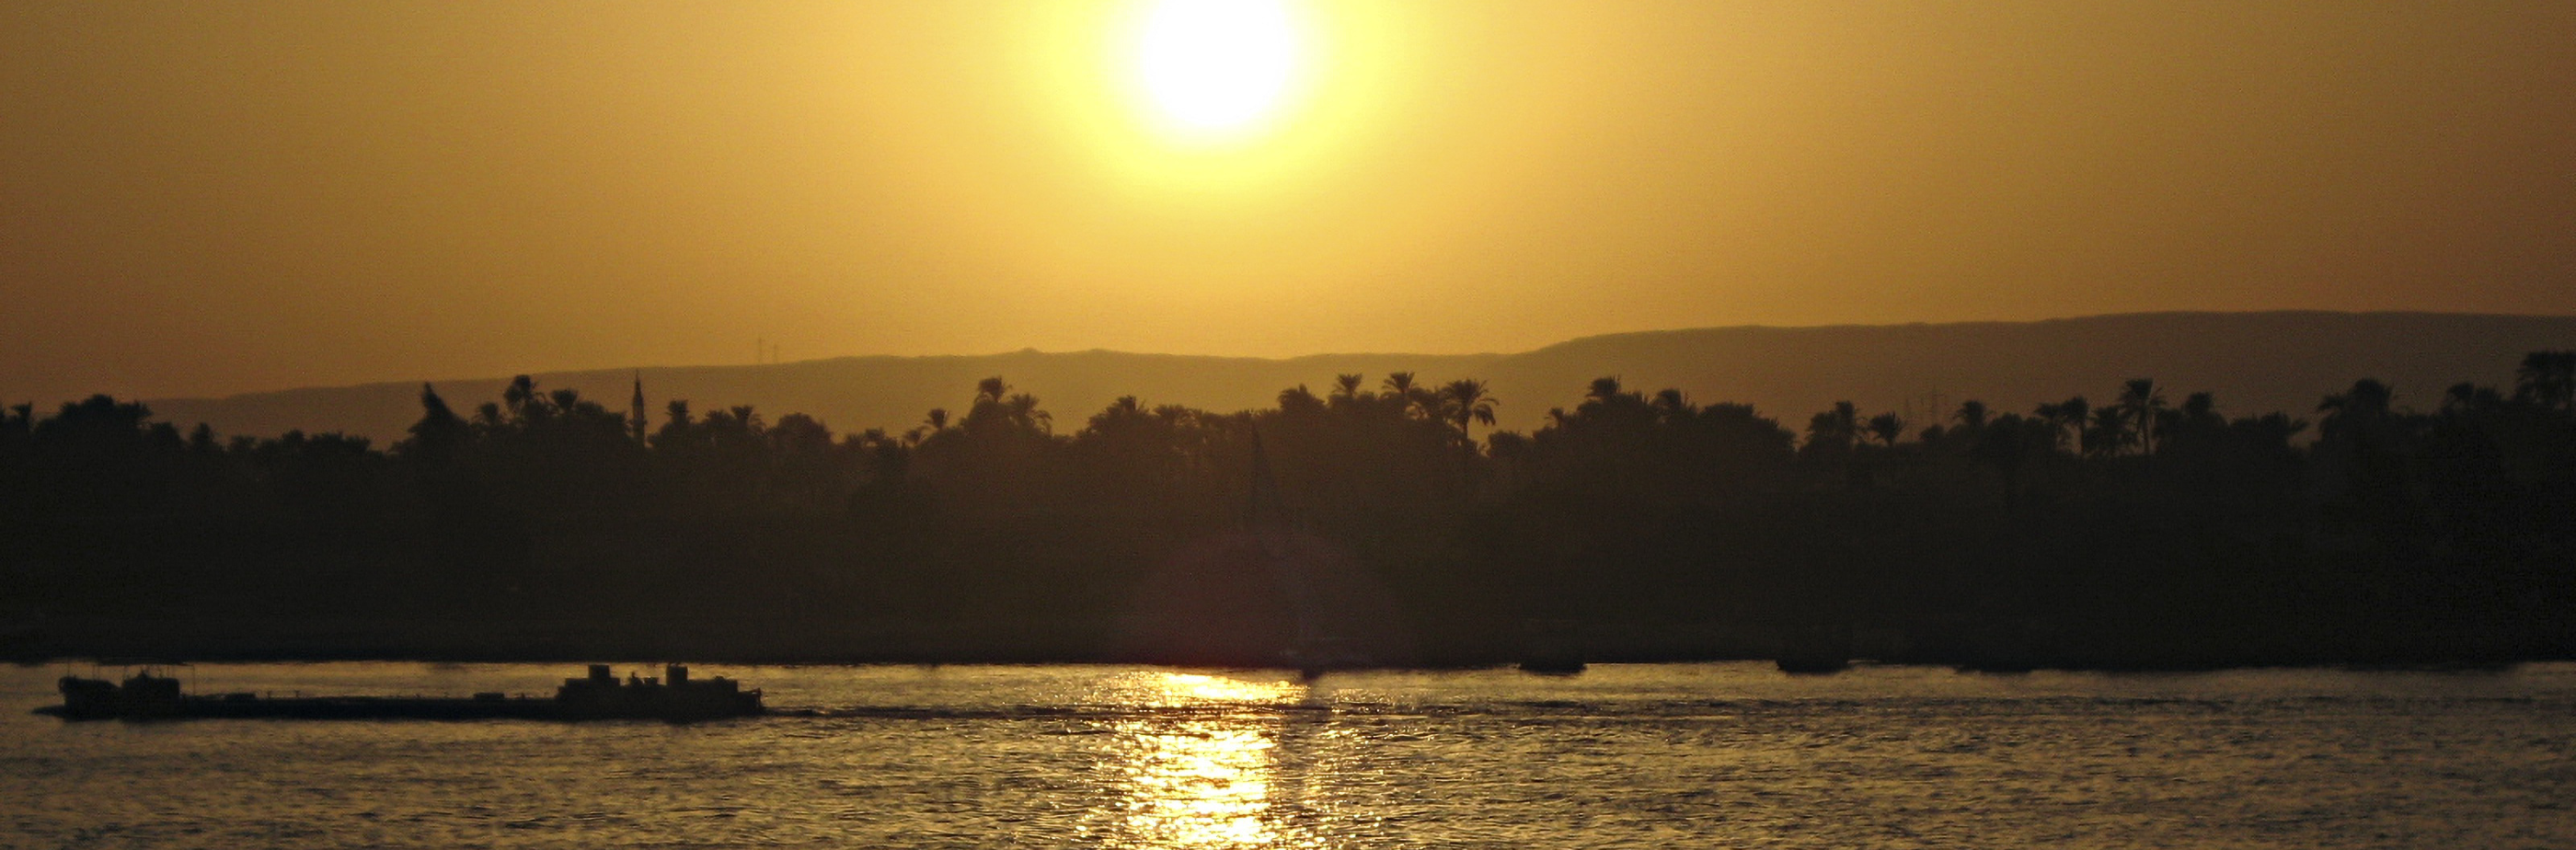 Our Muse: The Nile River